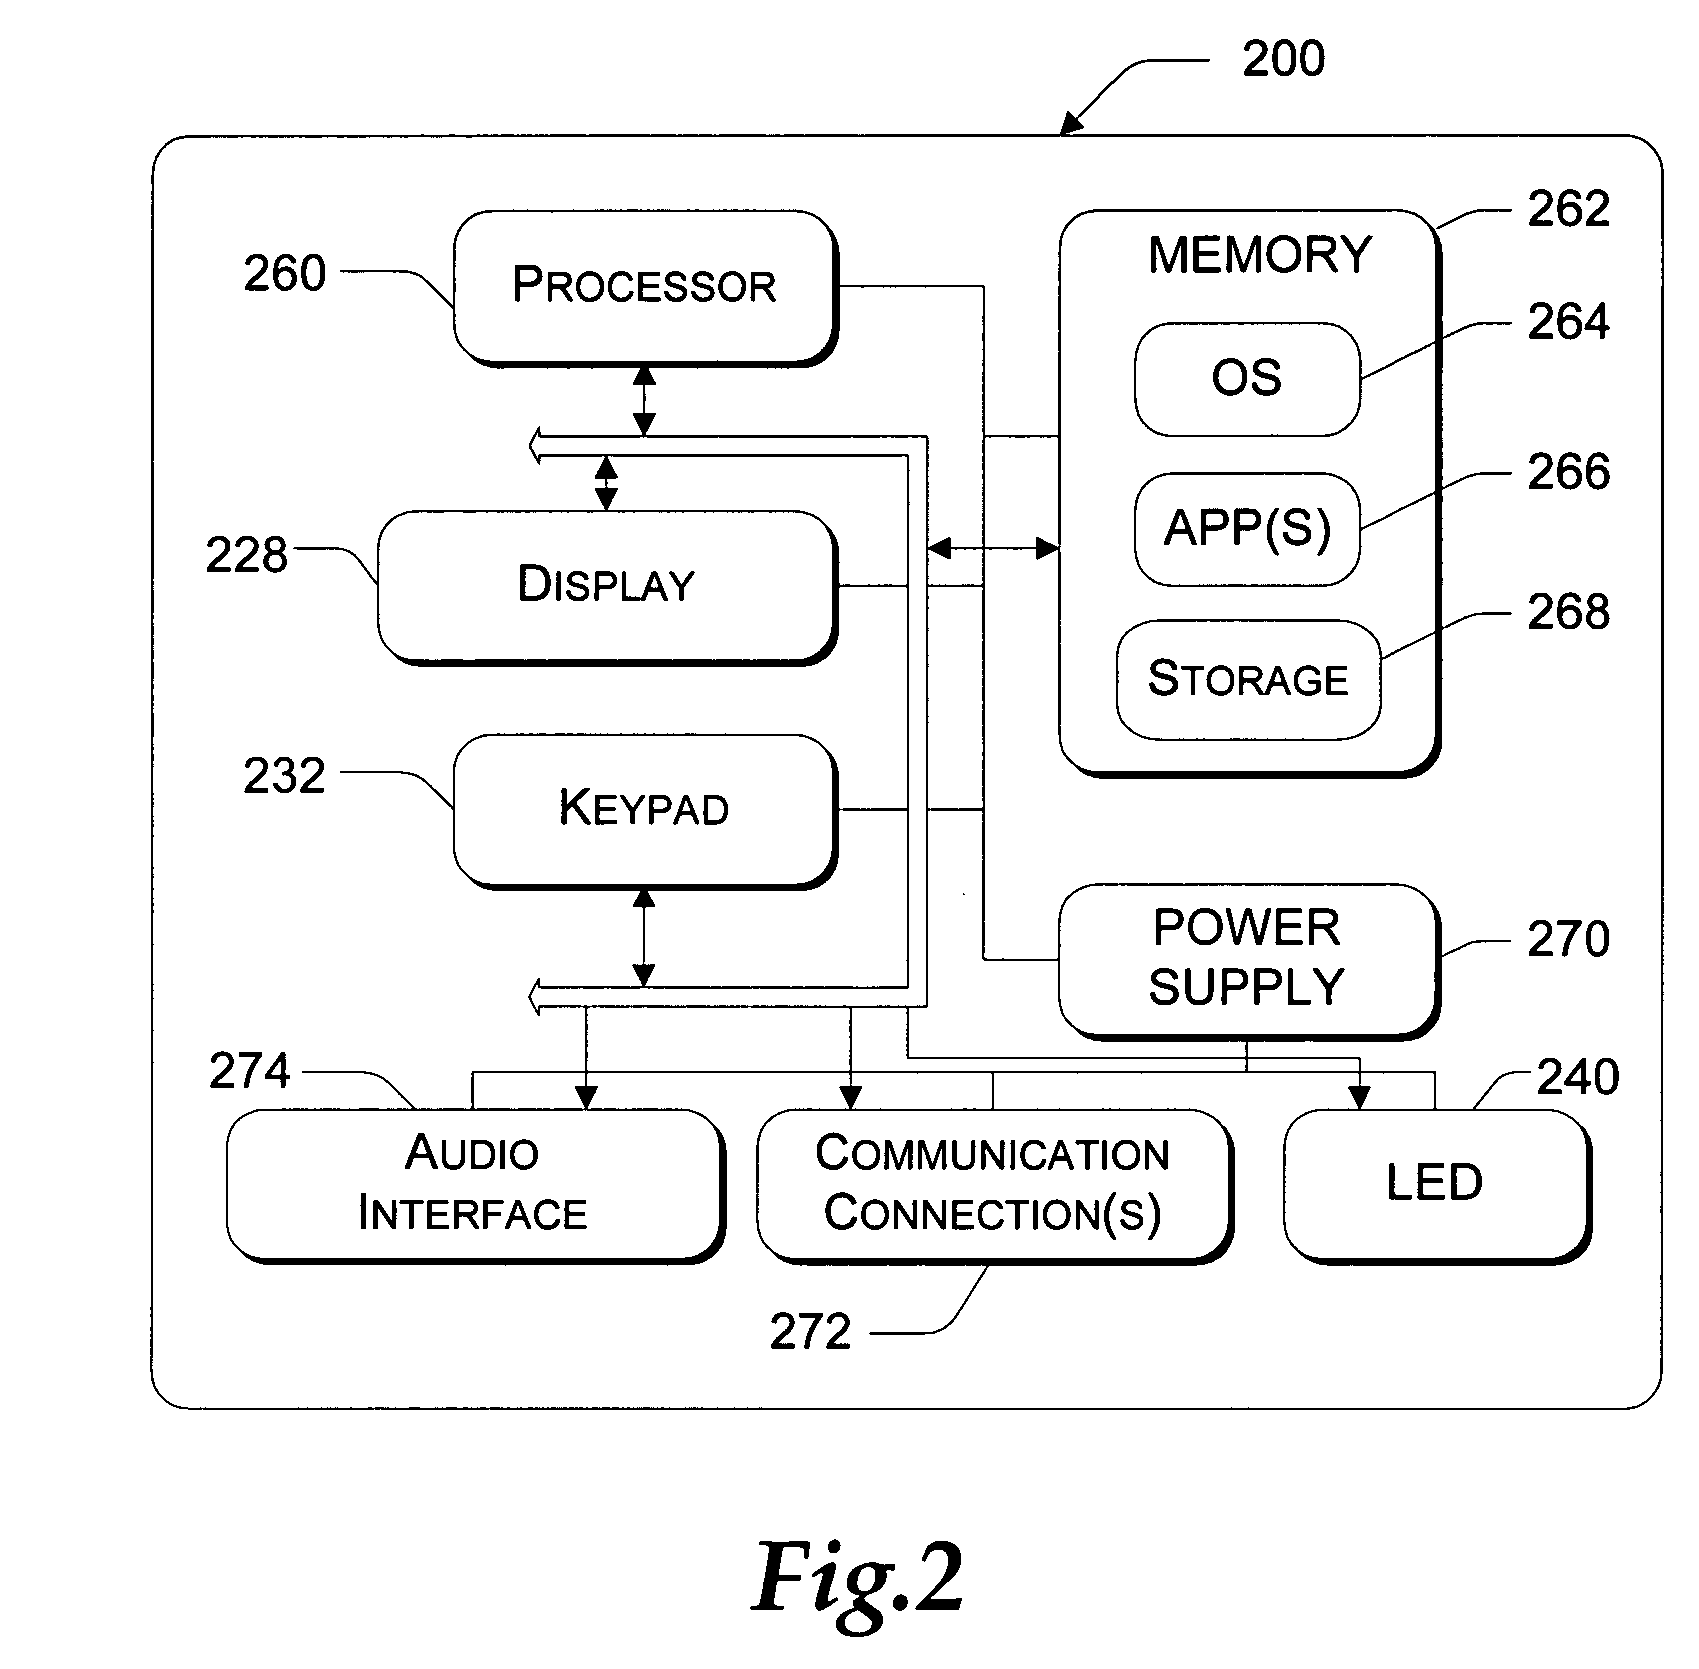 System and method for applying flexible attributes to execute asynchronous network requests